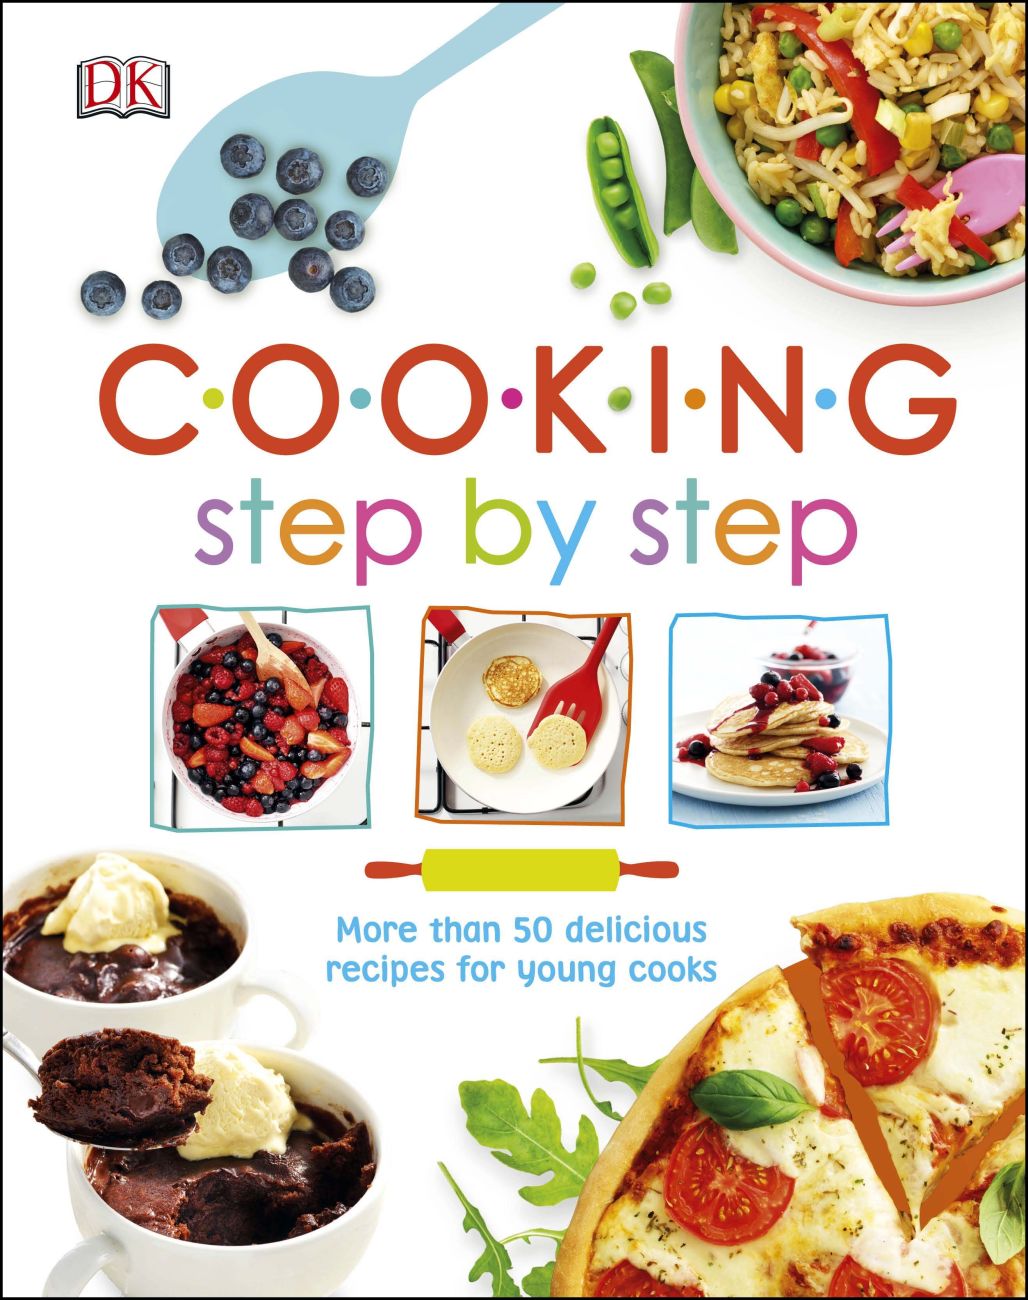 DK Cooking Step by Step – 50 recipes for young cooks